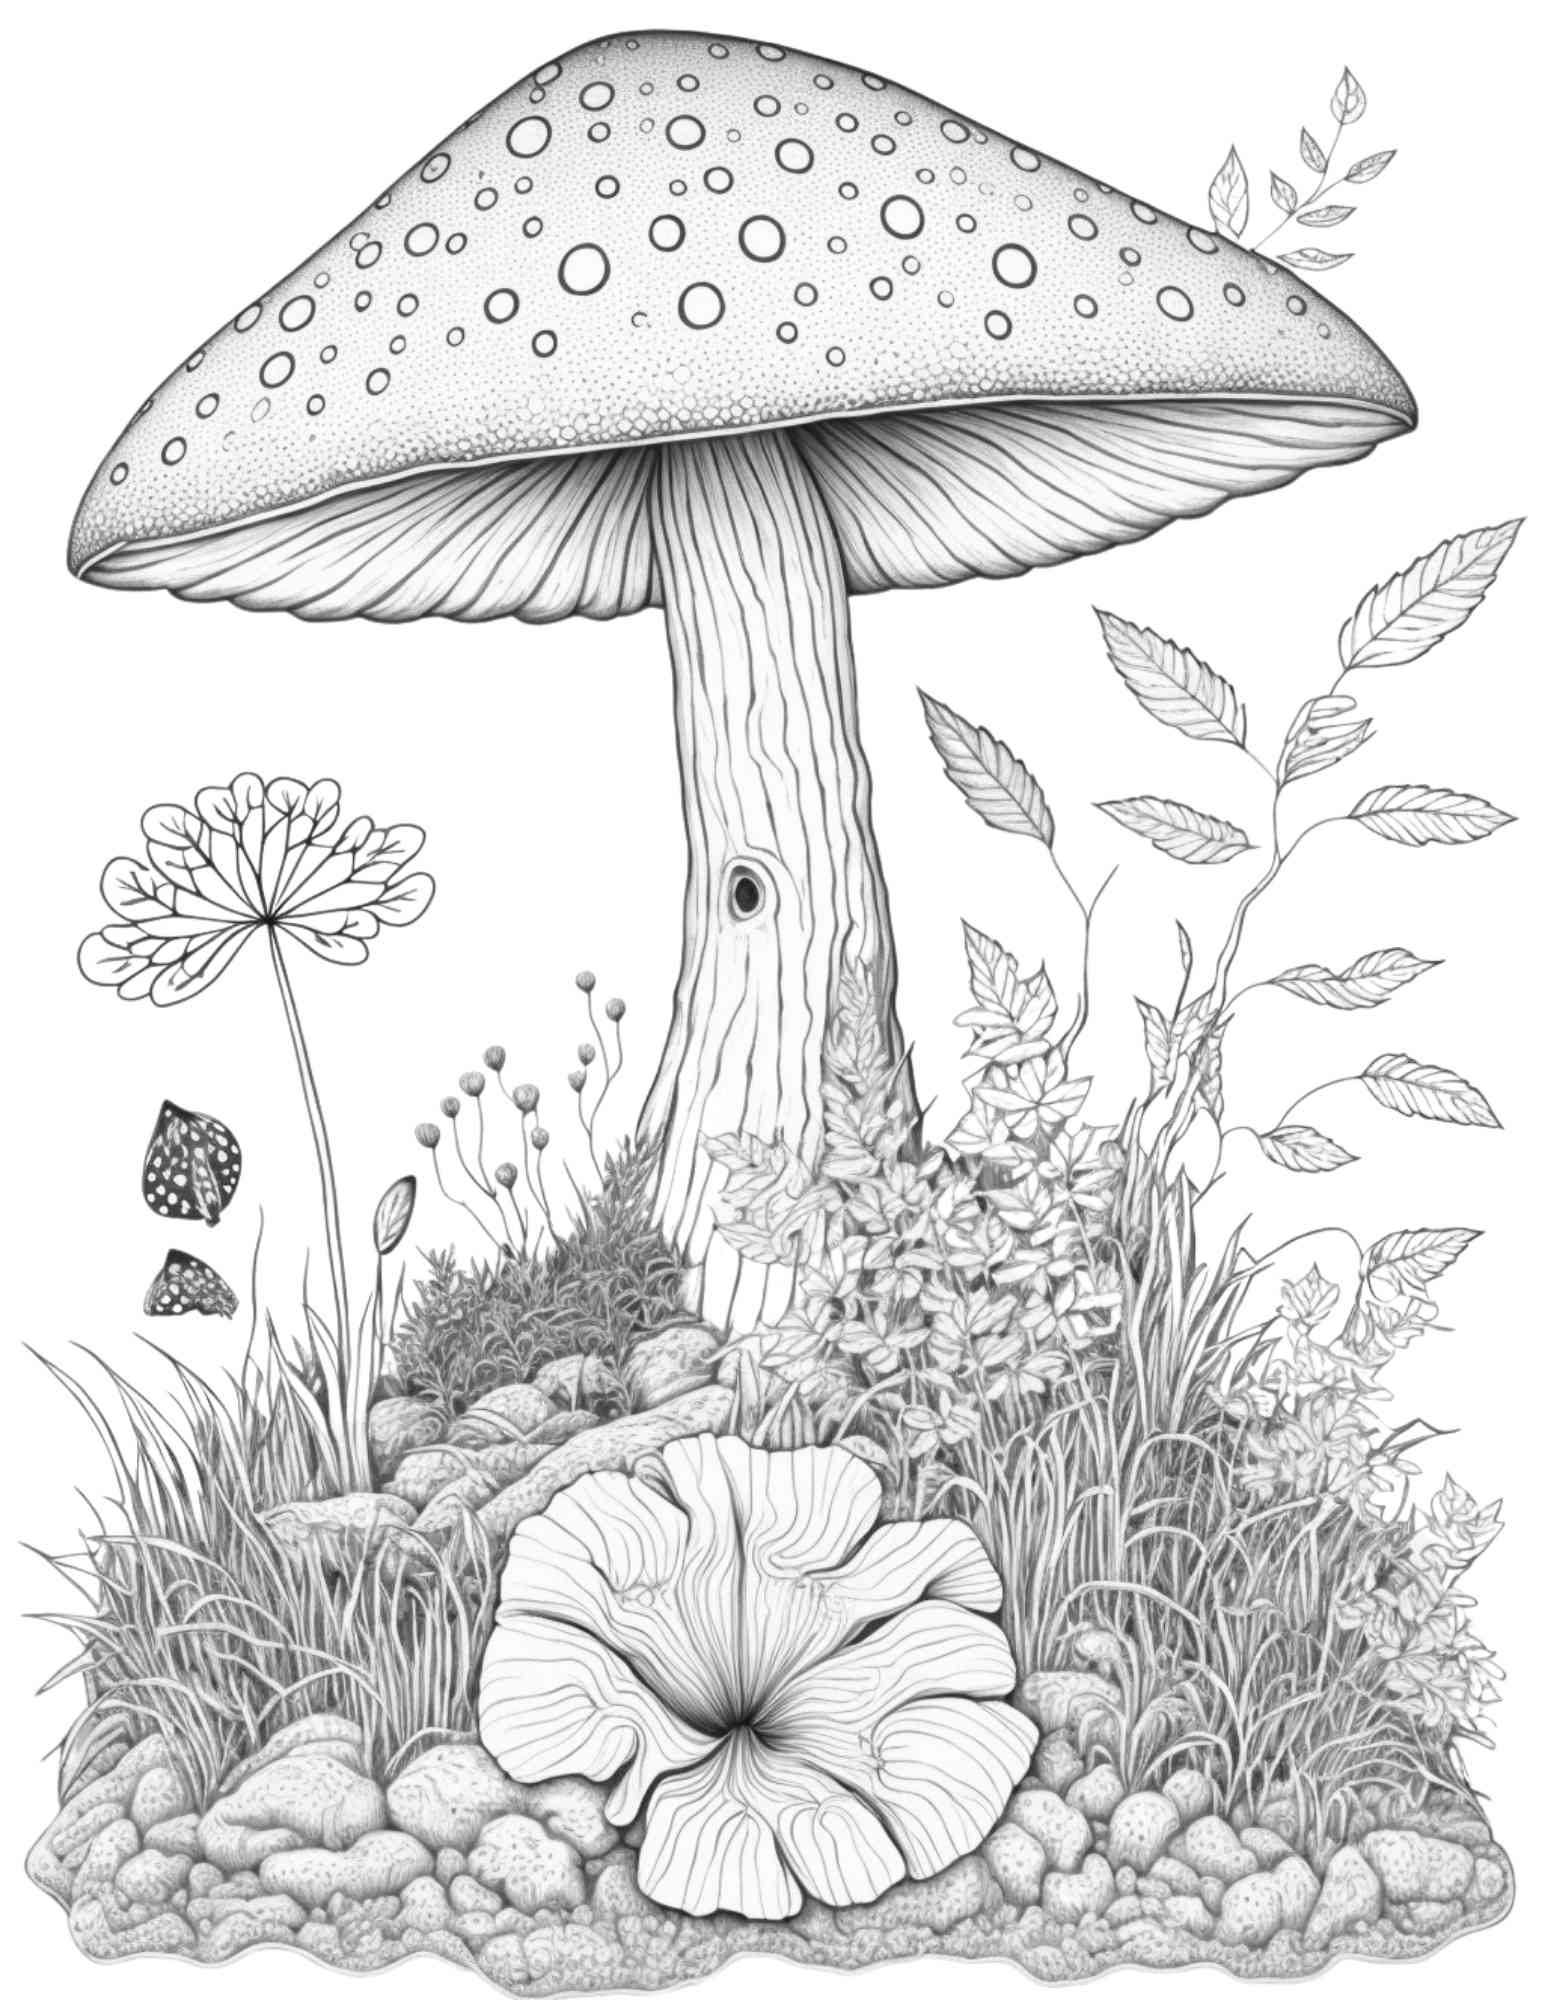 100 Mushroom Forest Coloring Pages Printable for Adults and Kids, Gray